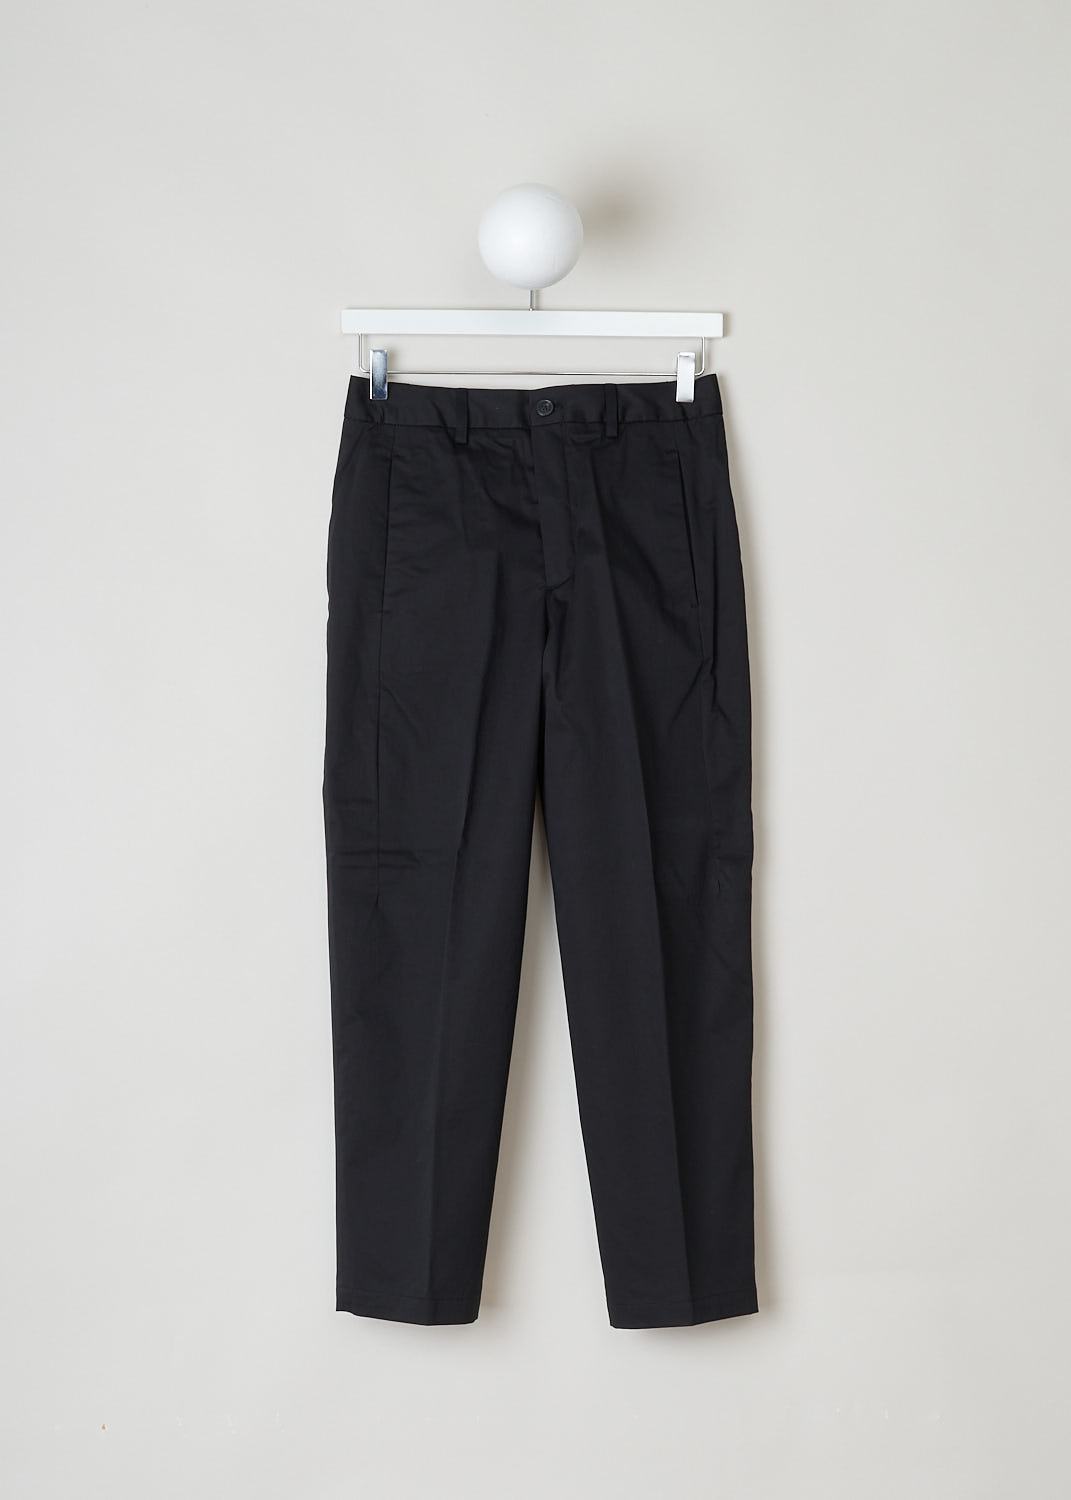 CLOSED, STURDY BLACK TROUSERS, LUDWIG_C91045_31S_22_100, Black, Front, These sturdy black trousers feature a regular length, a concealed clasp and zipper, two forward slanted pockets on the front and two welt pockets on the back.